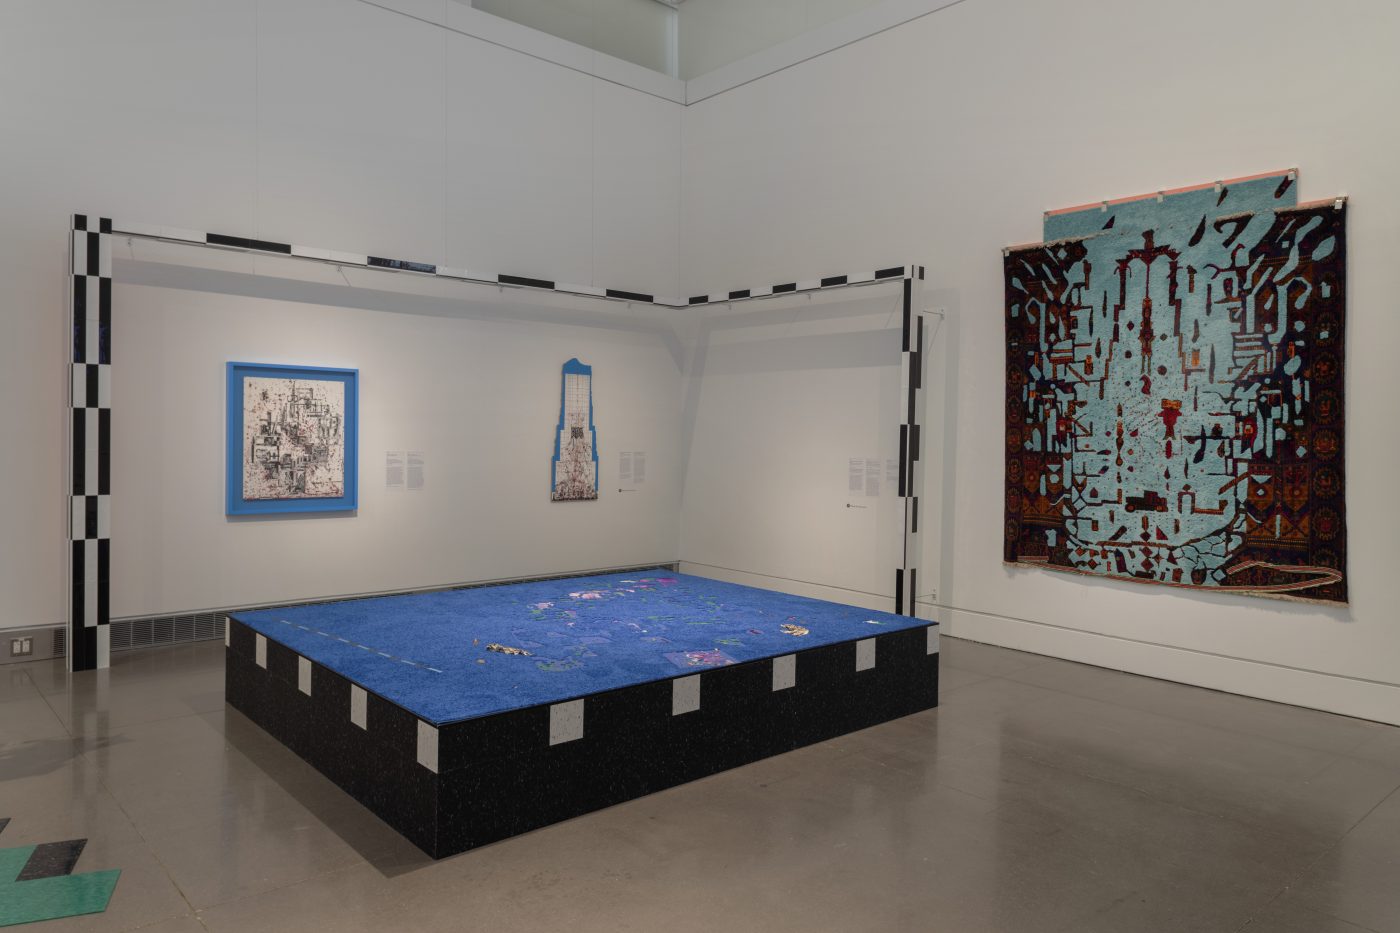 A corner installation view of Asif Mian’s RAF: Prosthetic Location exhibition. A large black block with a fuzzy blue surface sits on the gallery floor. Against the wall, on the left, is a rectangular shaped beam with black and white checkered stripes. Split between both walls are three abstract compositions of different sizes and museum text.